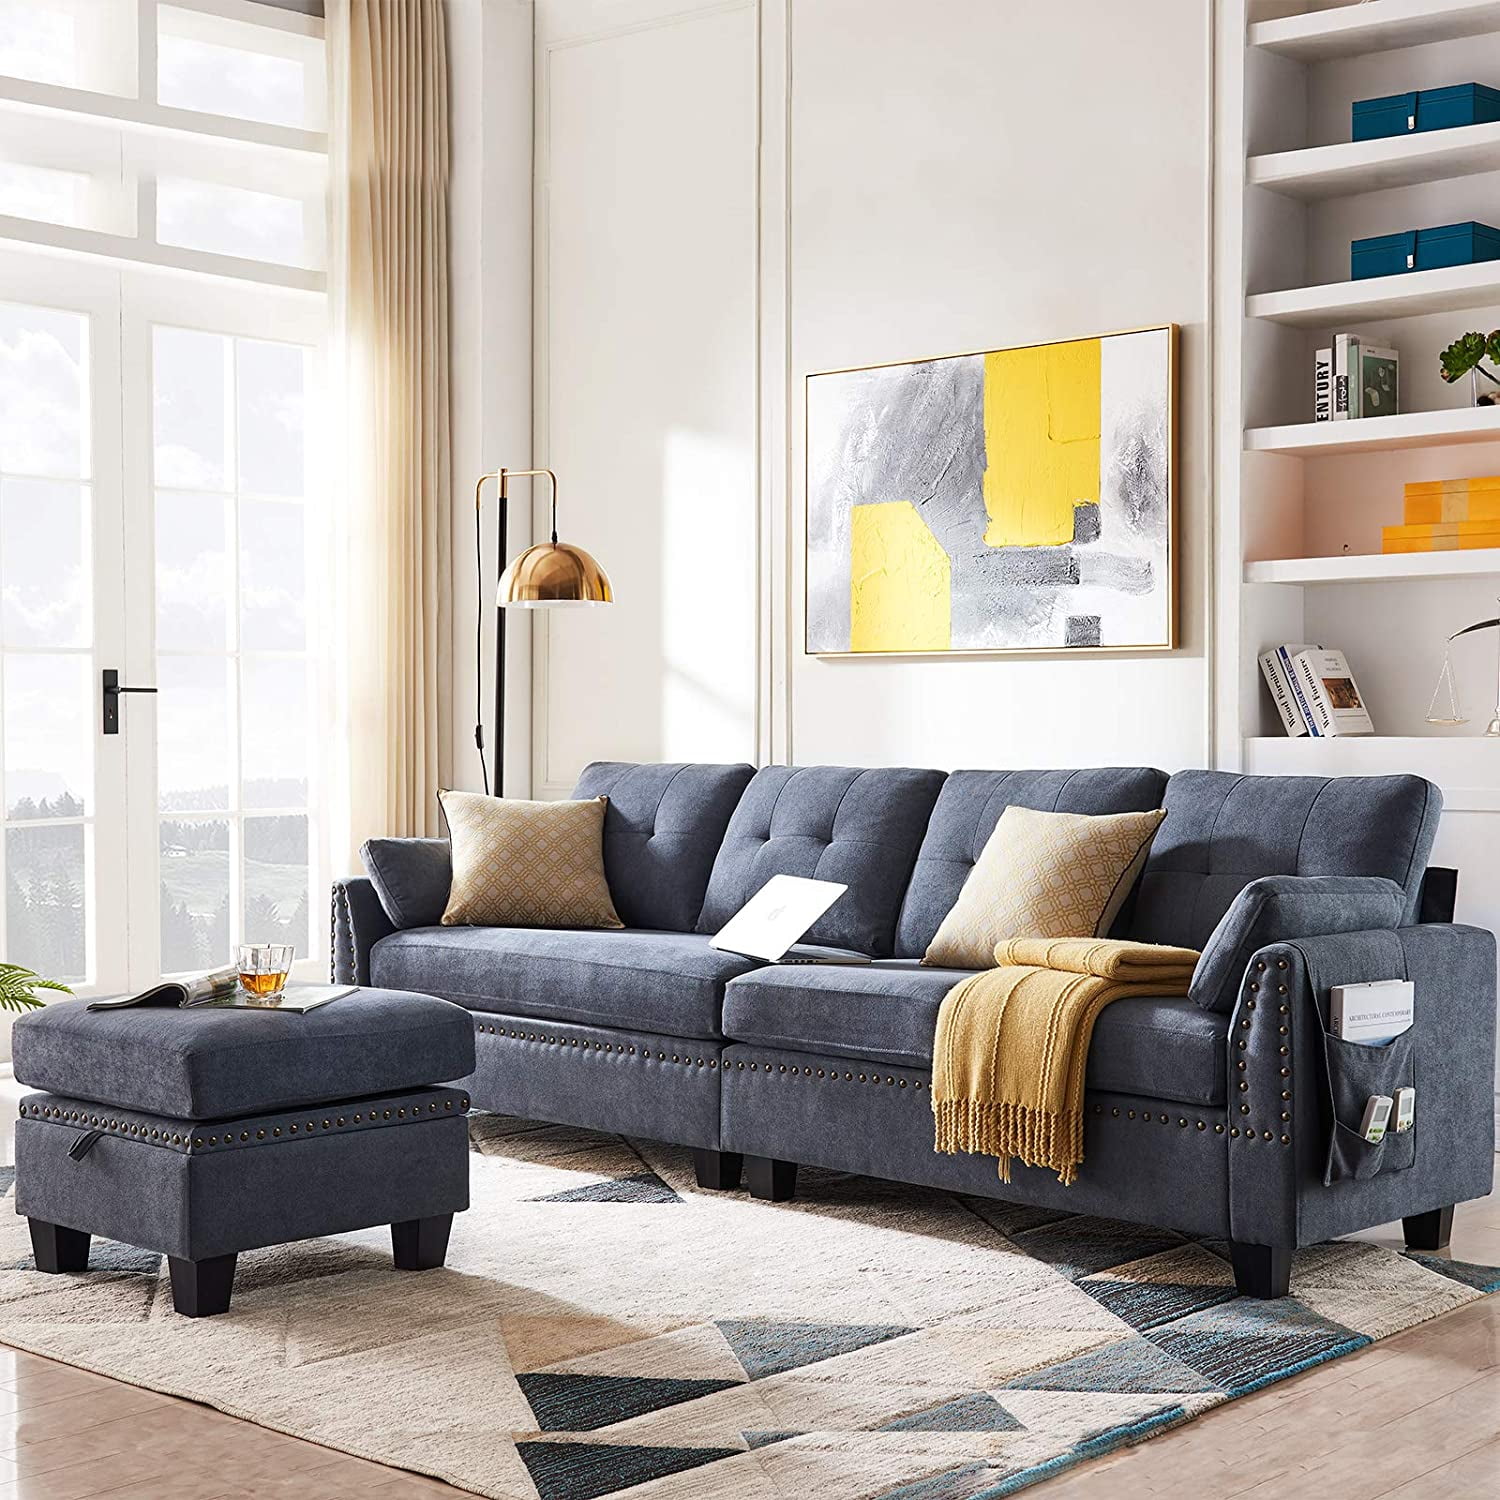 Honbay Reversible Sectional Sofa For Living Room L Shape Couch 4 Seat Sofas Sectional For Apartment Walmart Com Walmart Com